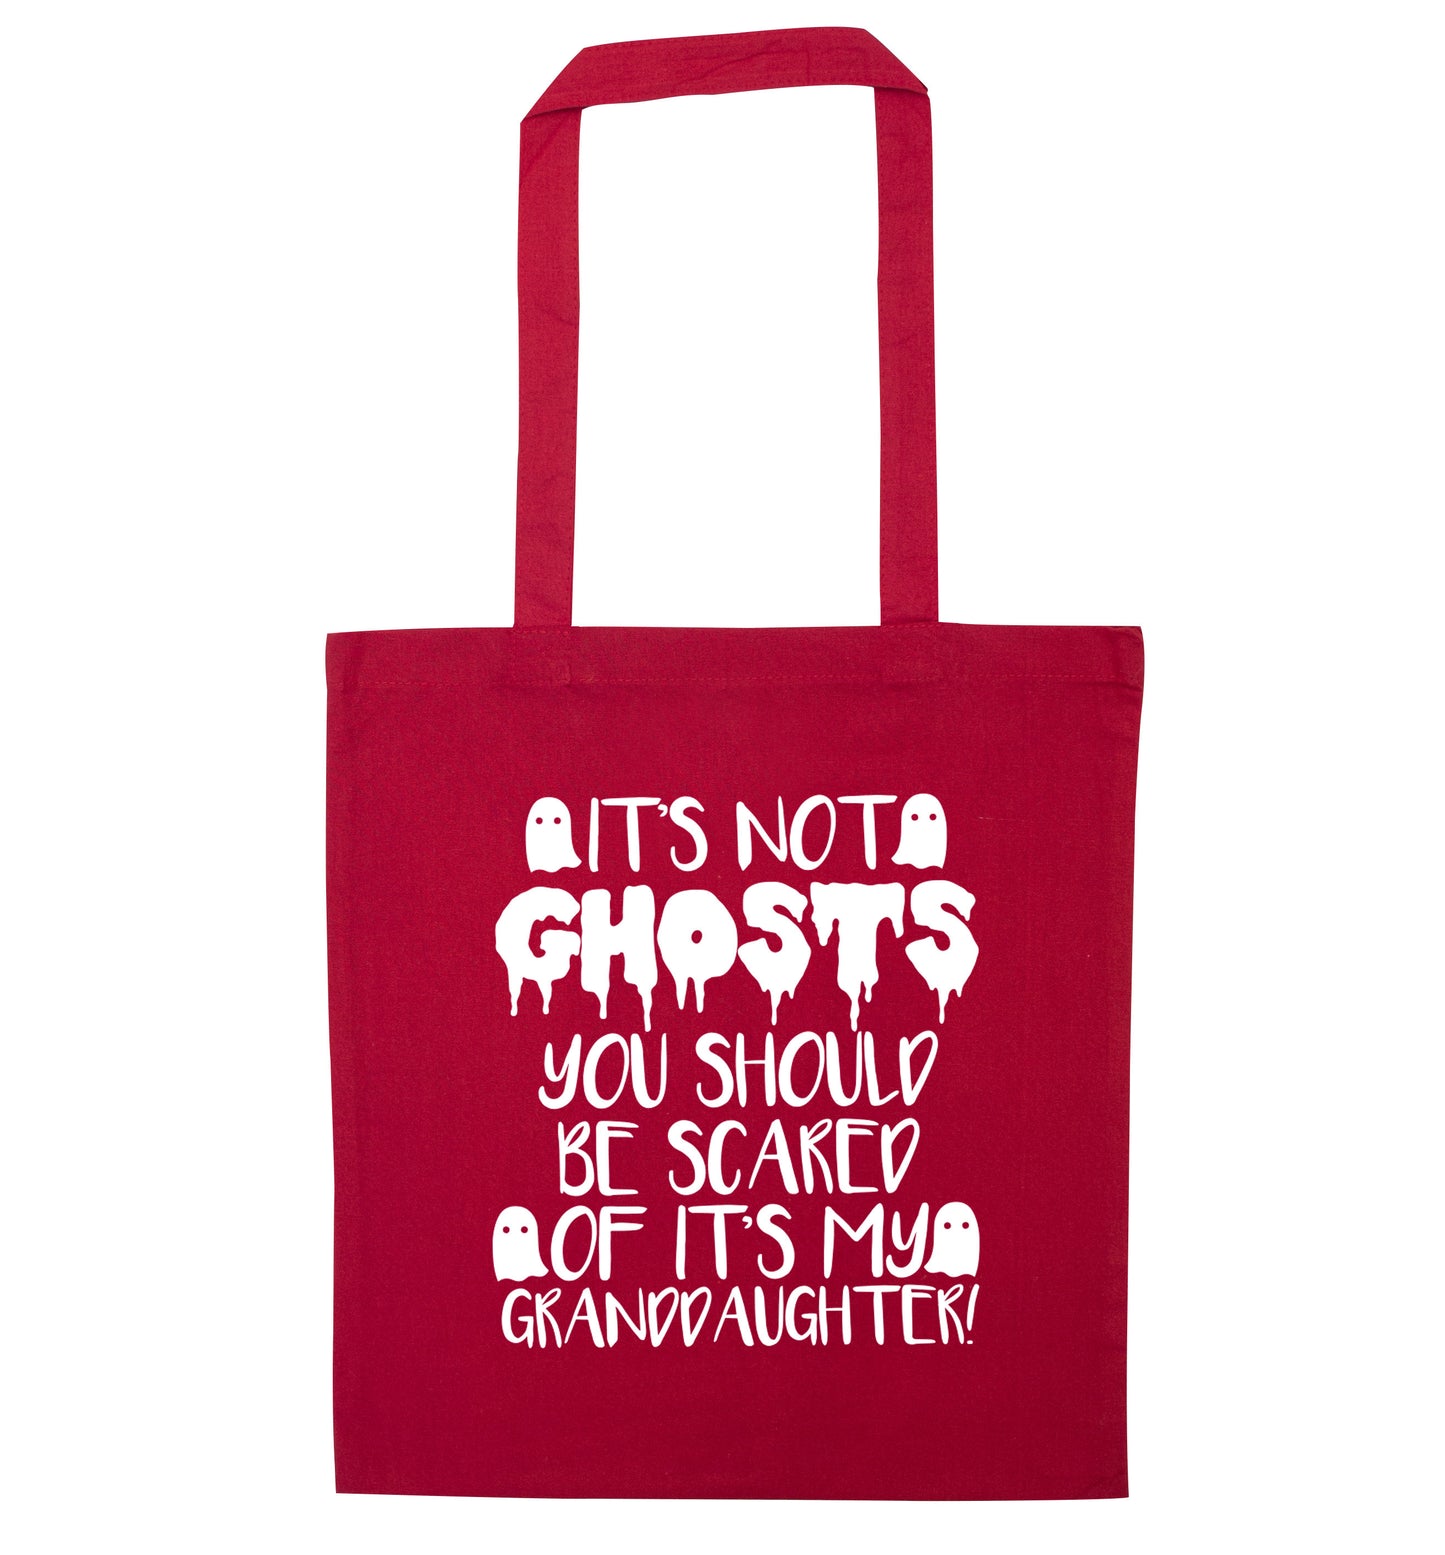 It's not ghosts you should be scared of it's my granddaughter! red tote bag